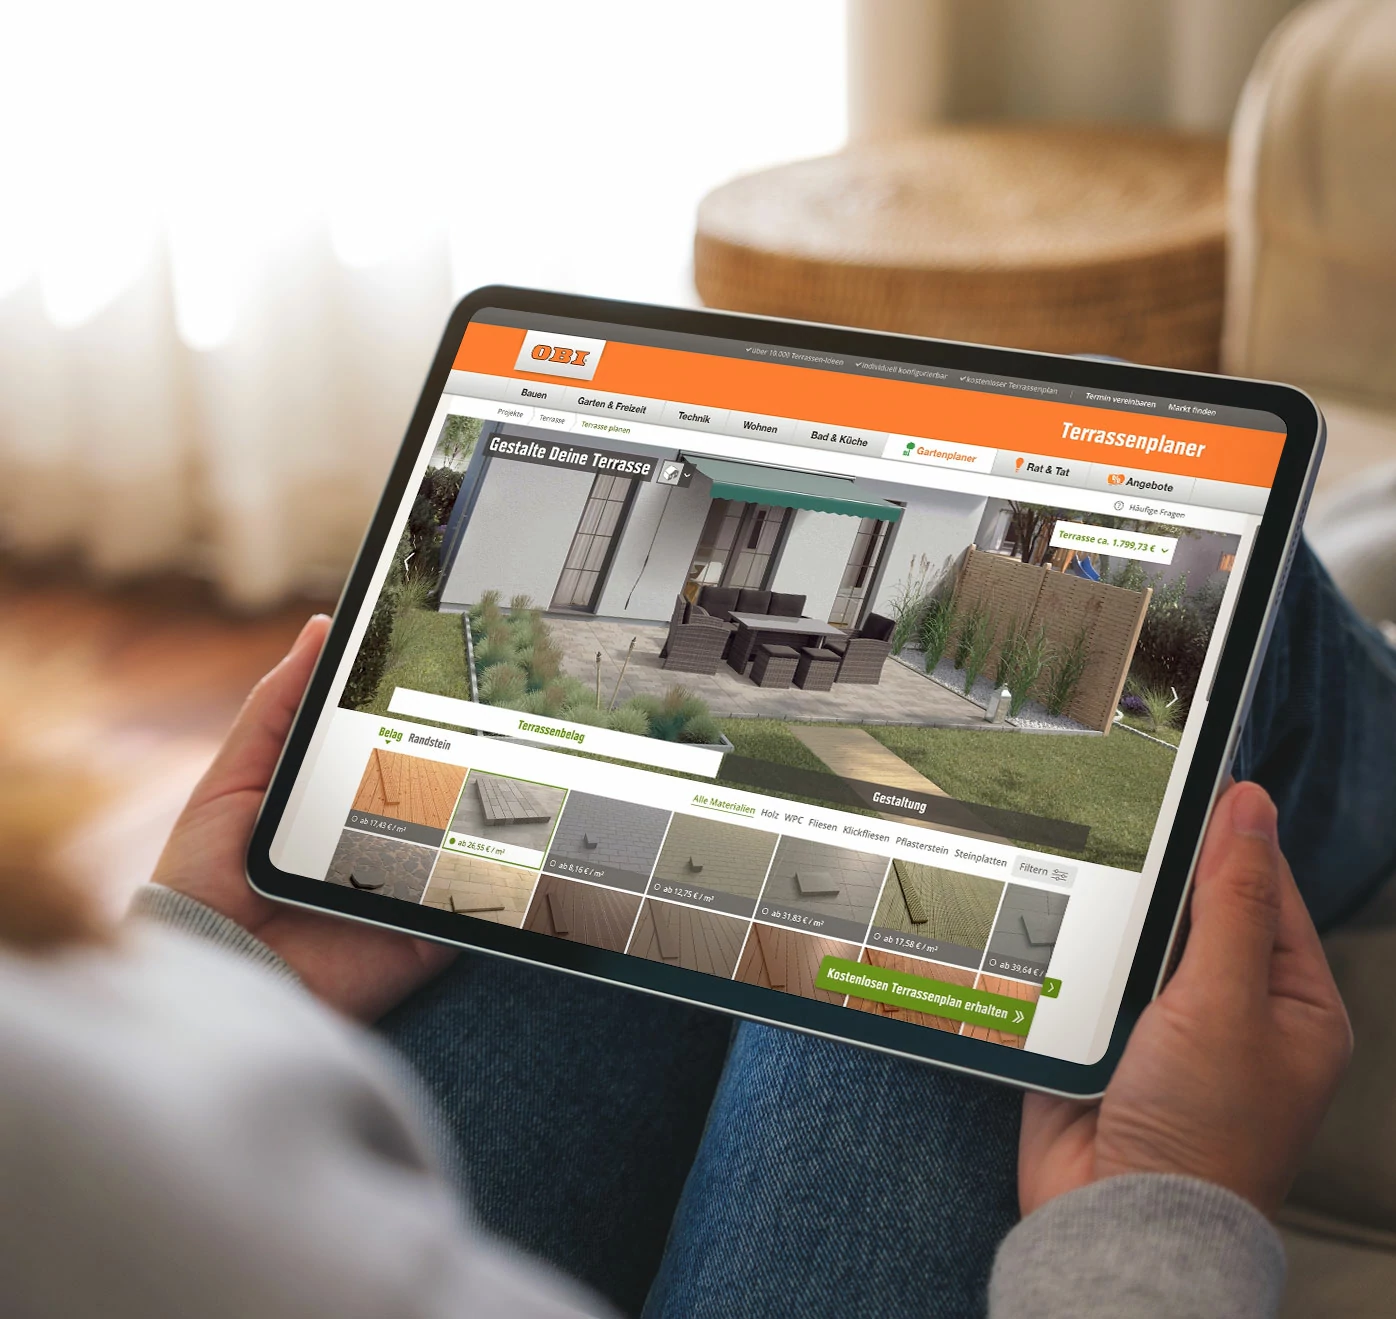 Tablet on a person's lap. There you can see an outdoor terrace and a configurator that is currently being used to select different floor coverings for the terrace.